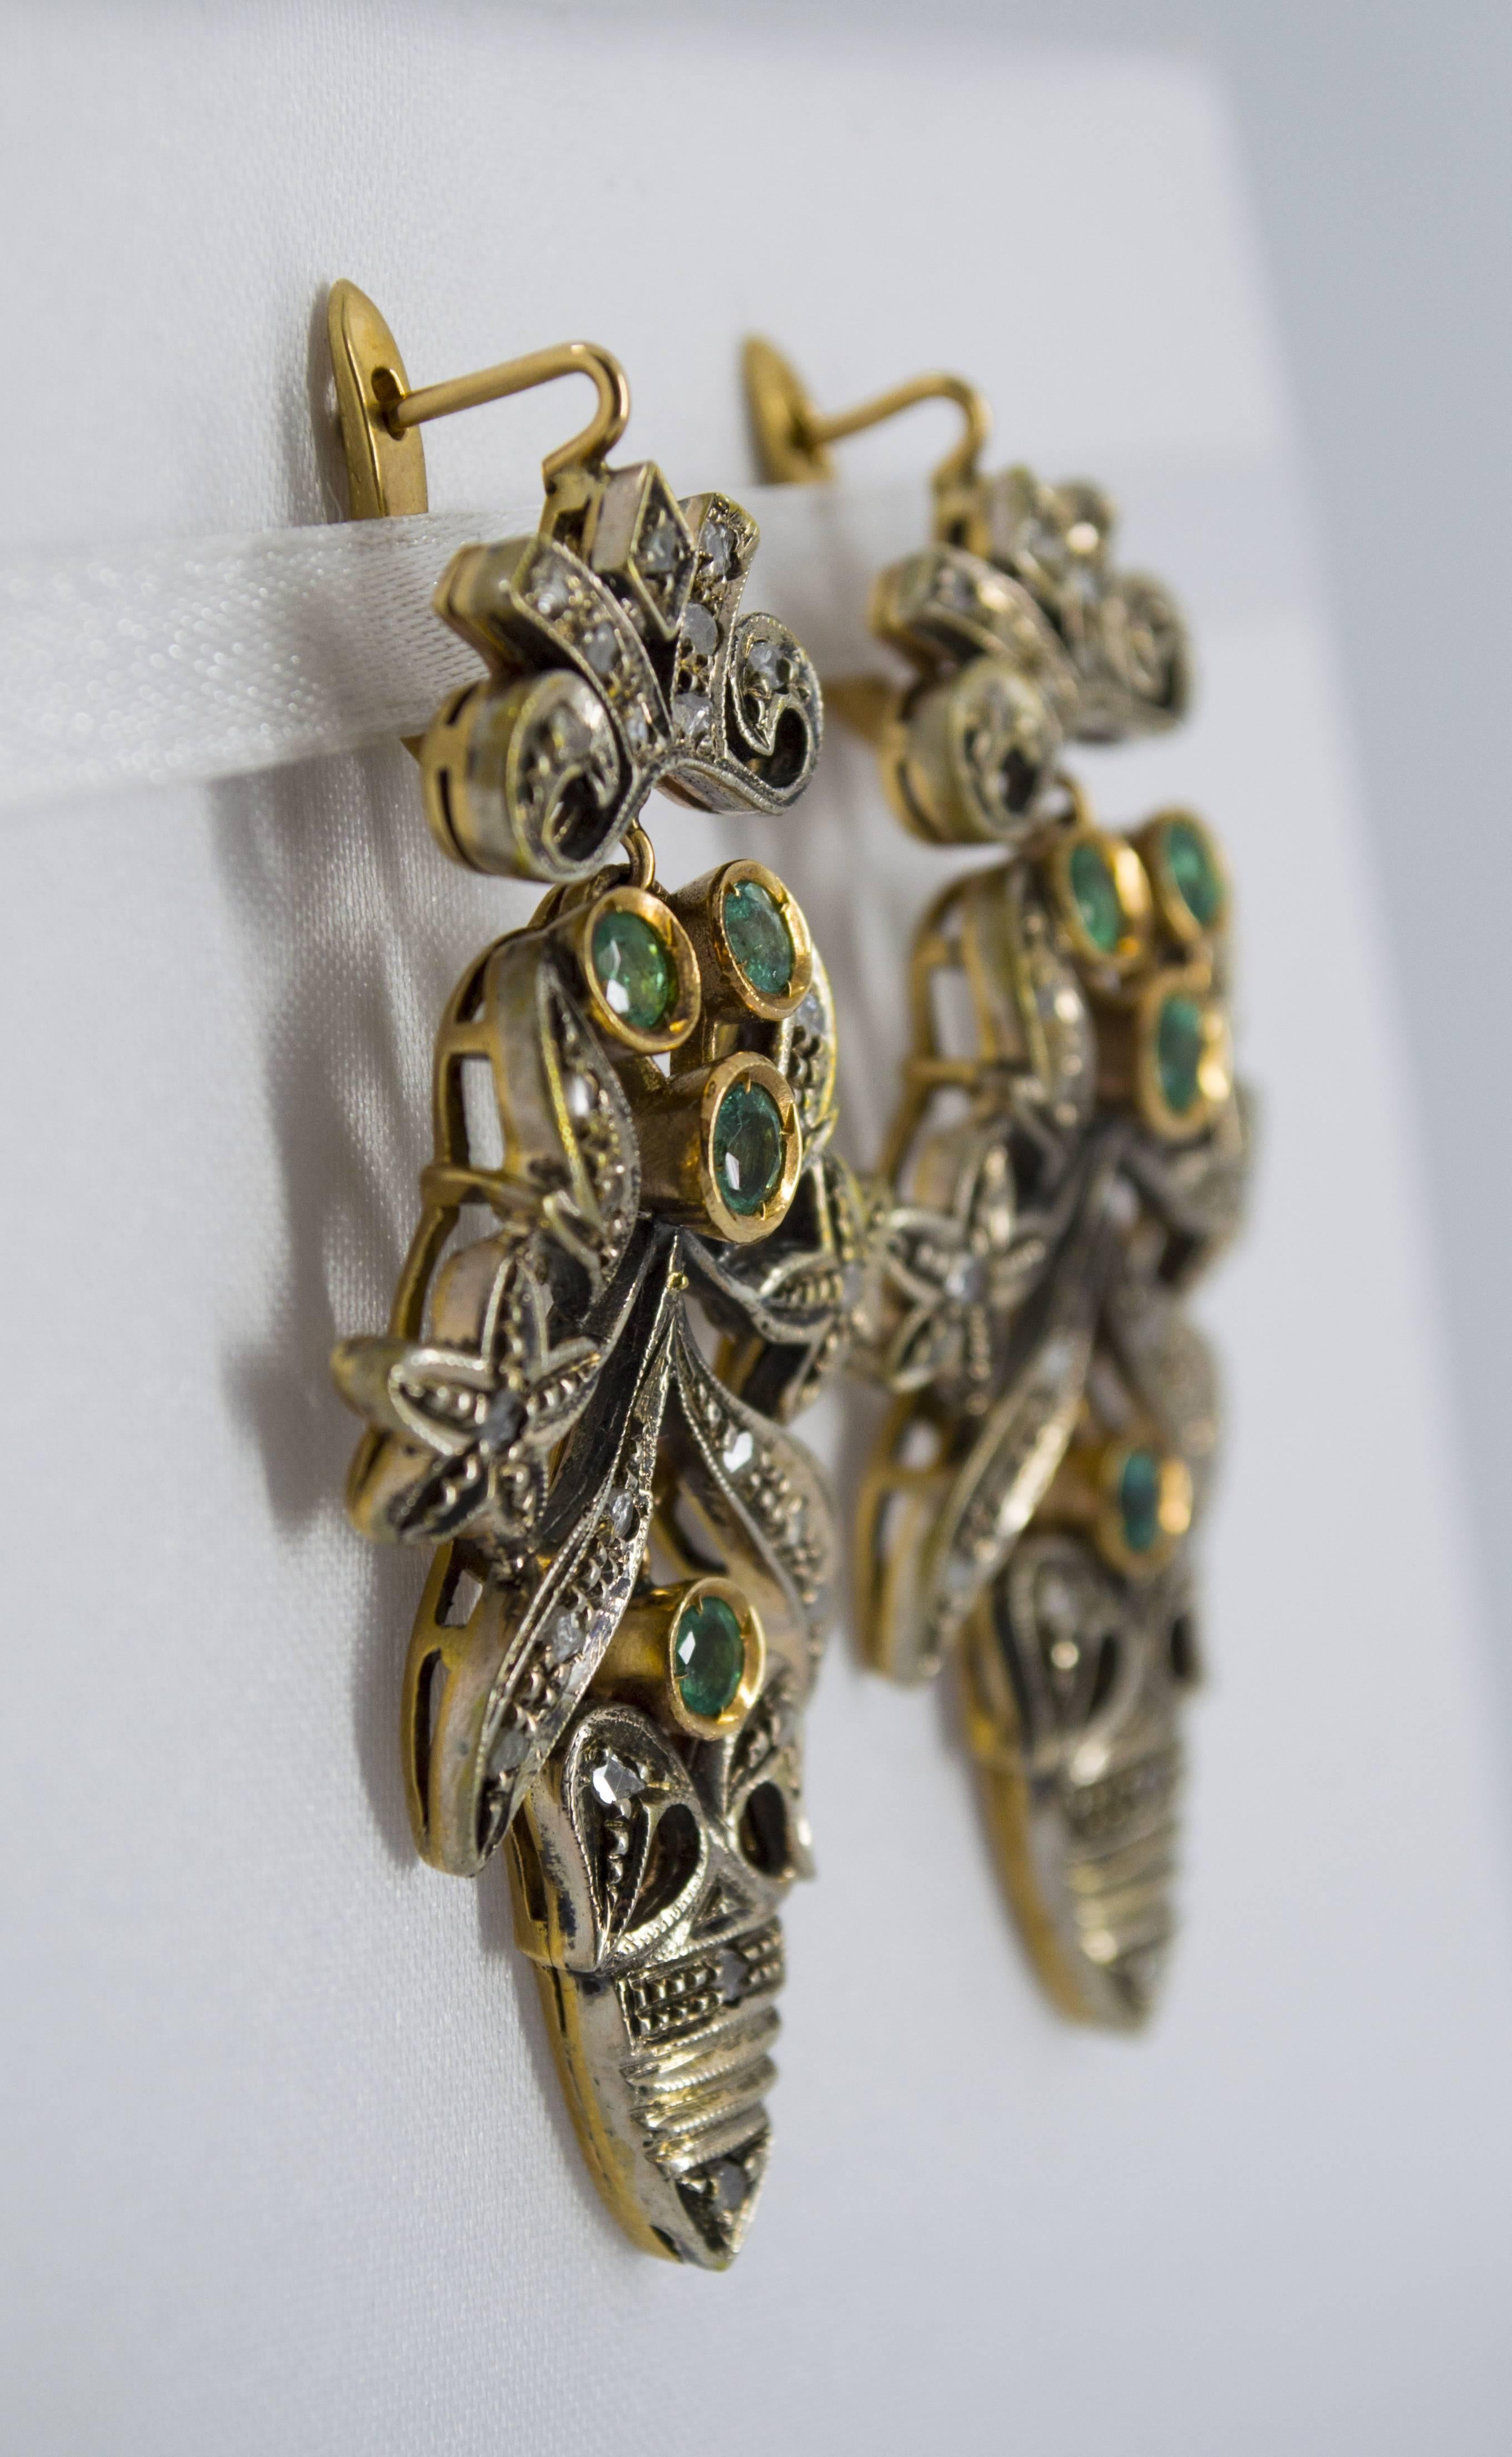 The earrings are made of 9K Yellow Gold and Sterling Silver and they've 1.60 carats of Emeralds and 0.60 carats of White Rose Cut Diamonds. 
The earrings are inspired by Art Nouveau so they're vintage reproduction.
We're a workshop so every piece is